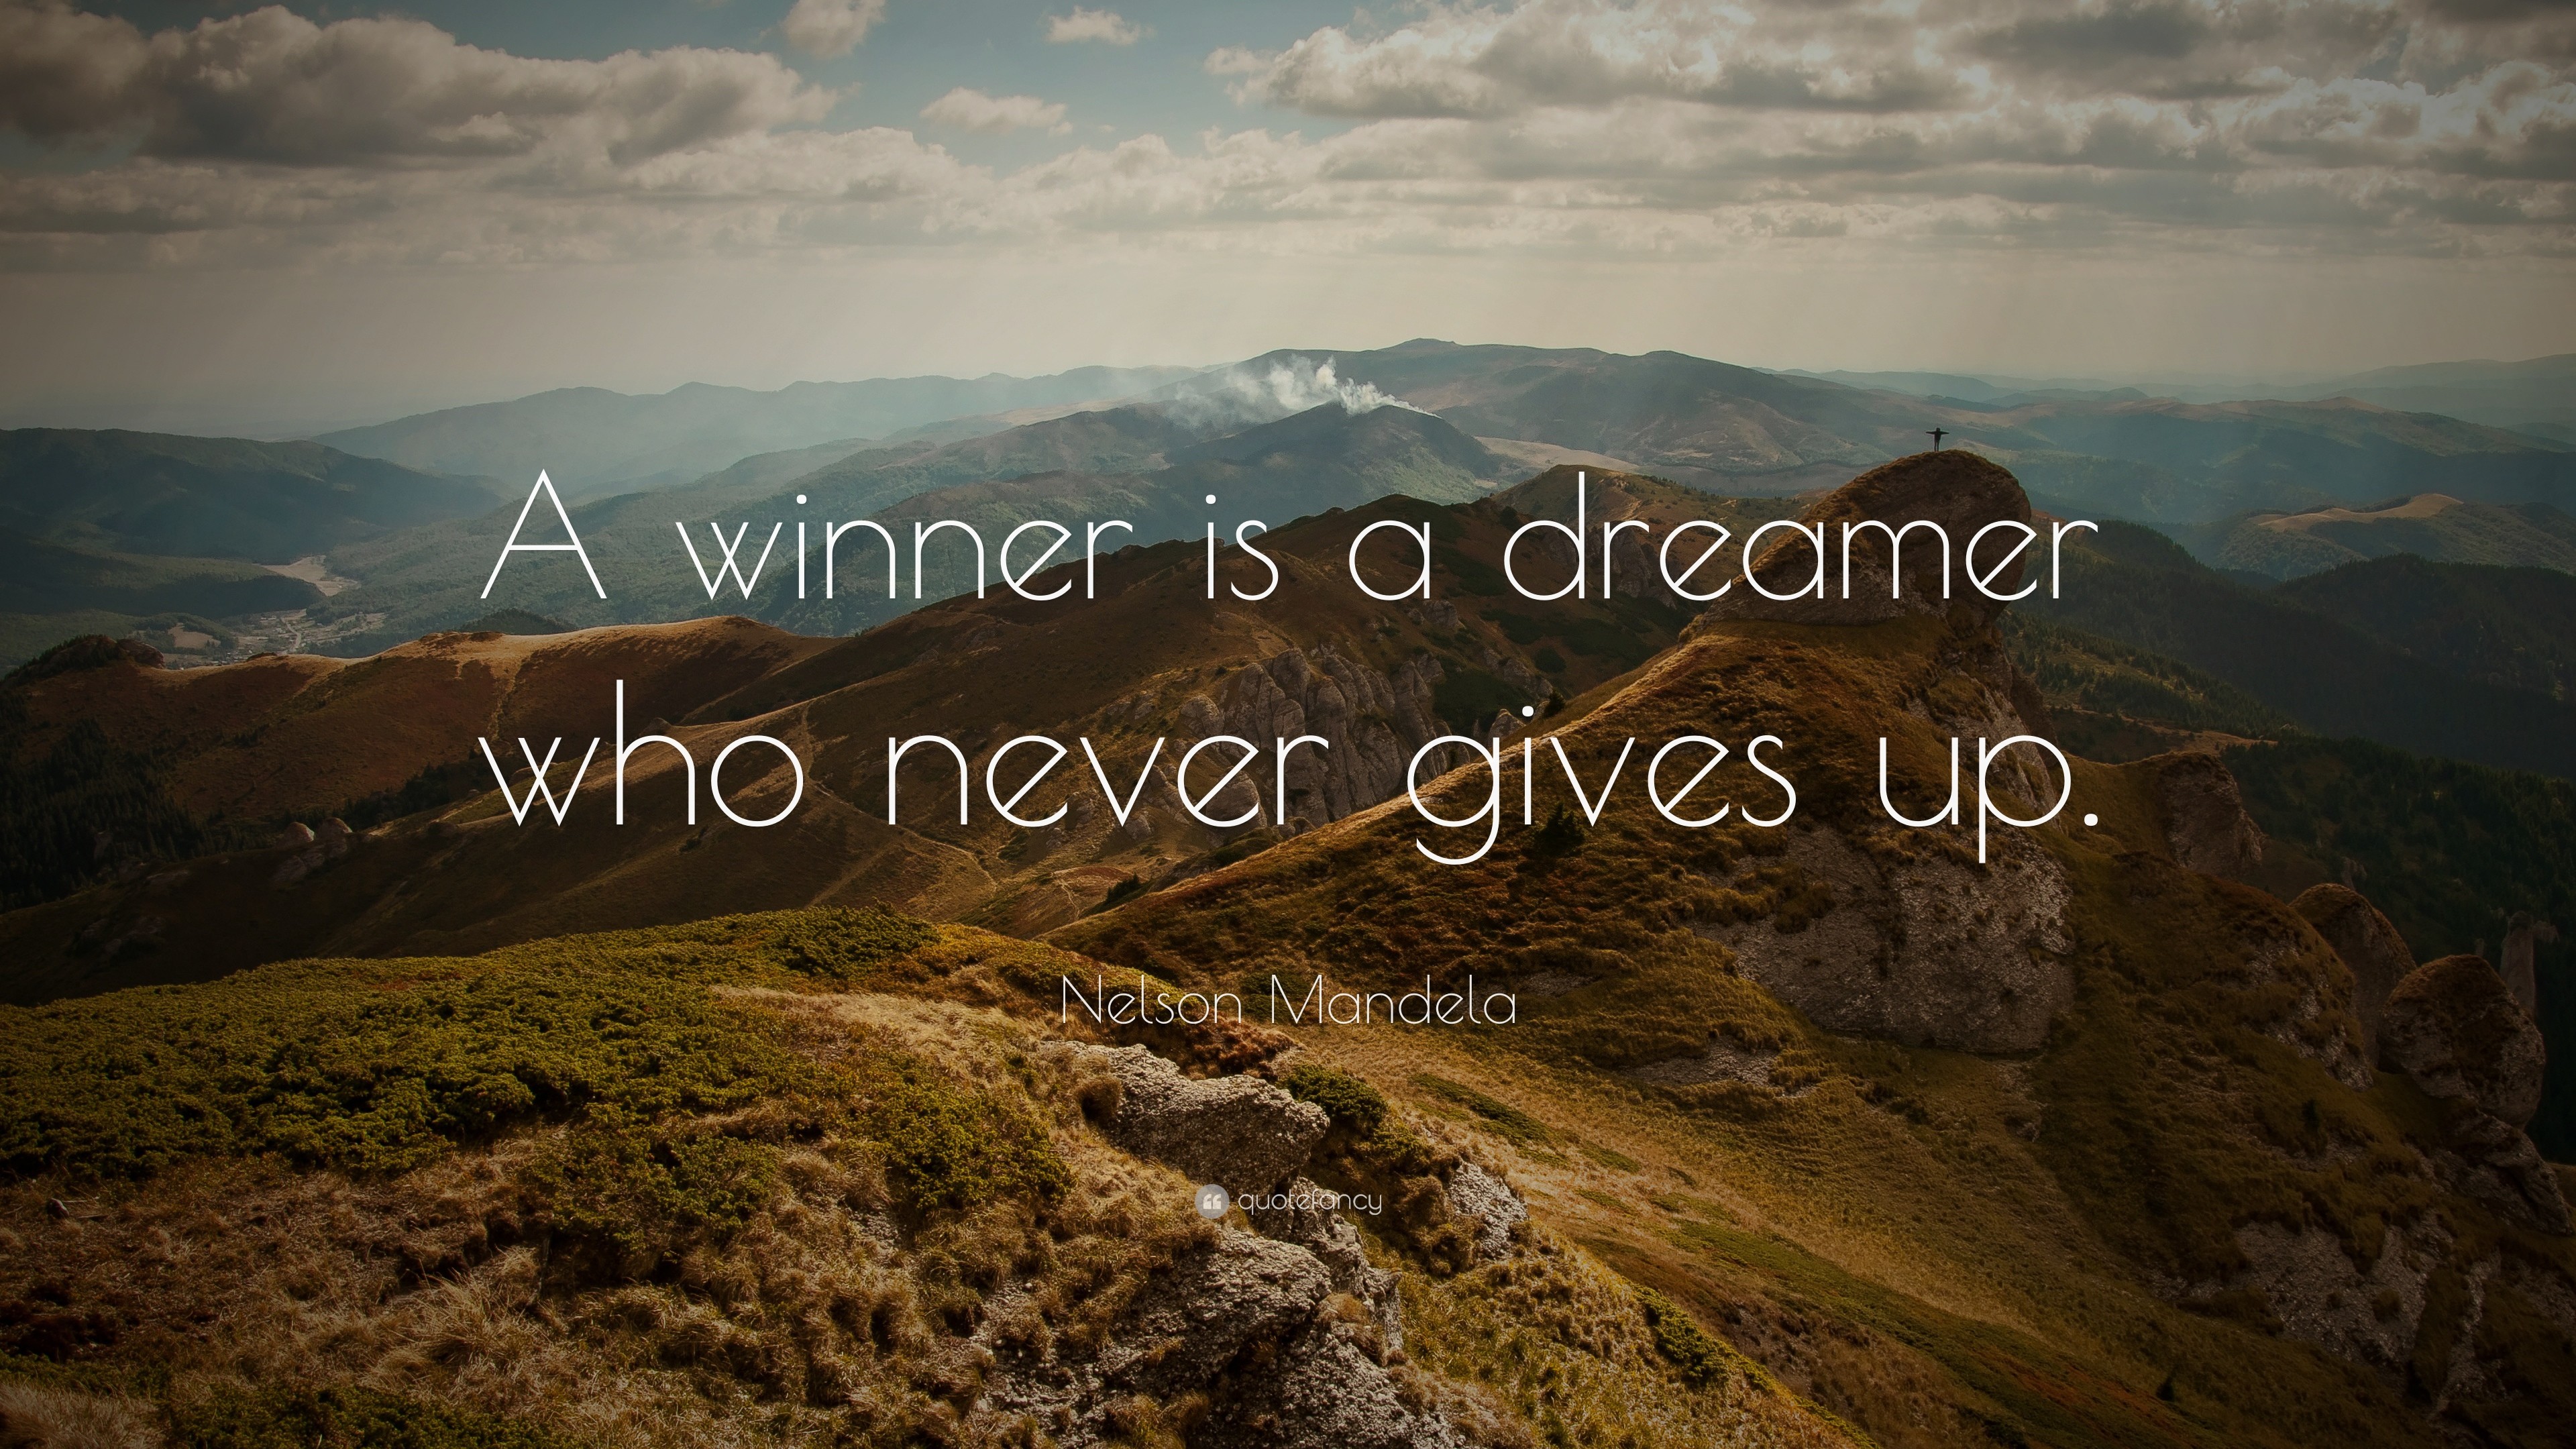 3840x2160 Nelson Mandela Quote: “A winner is a dreamer who never gives up.”